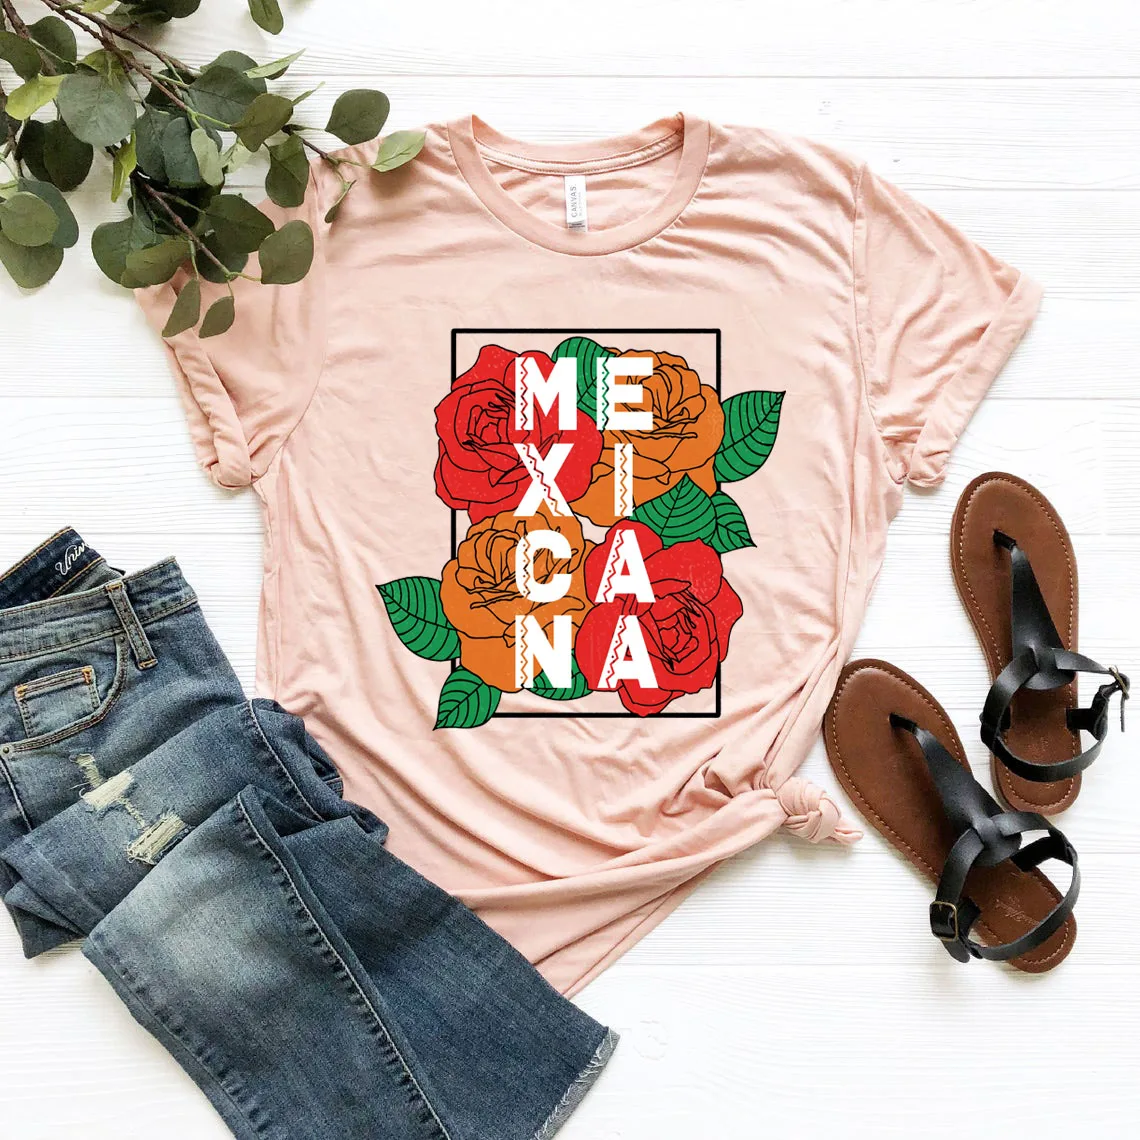 

Mexicana T Shirts Mexico T-Shirt Mexican Latina Gift Feminism Tee Rose Flower Shirts Women Aesthetic Graphic Tees Summer Tops